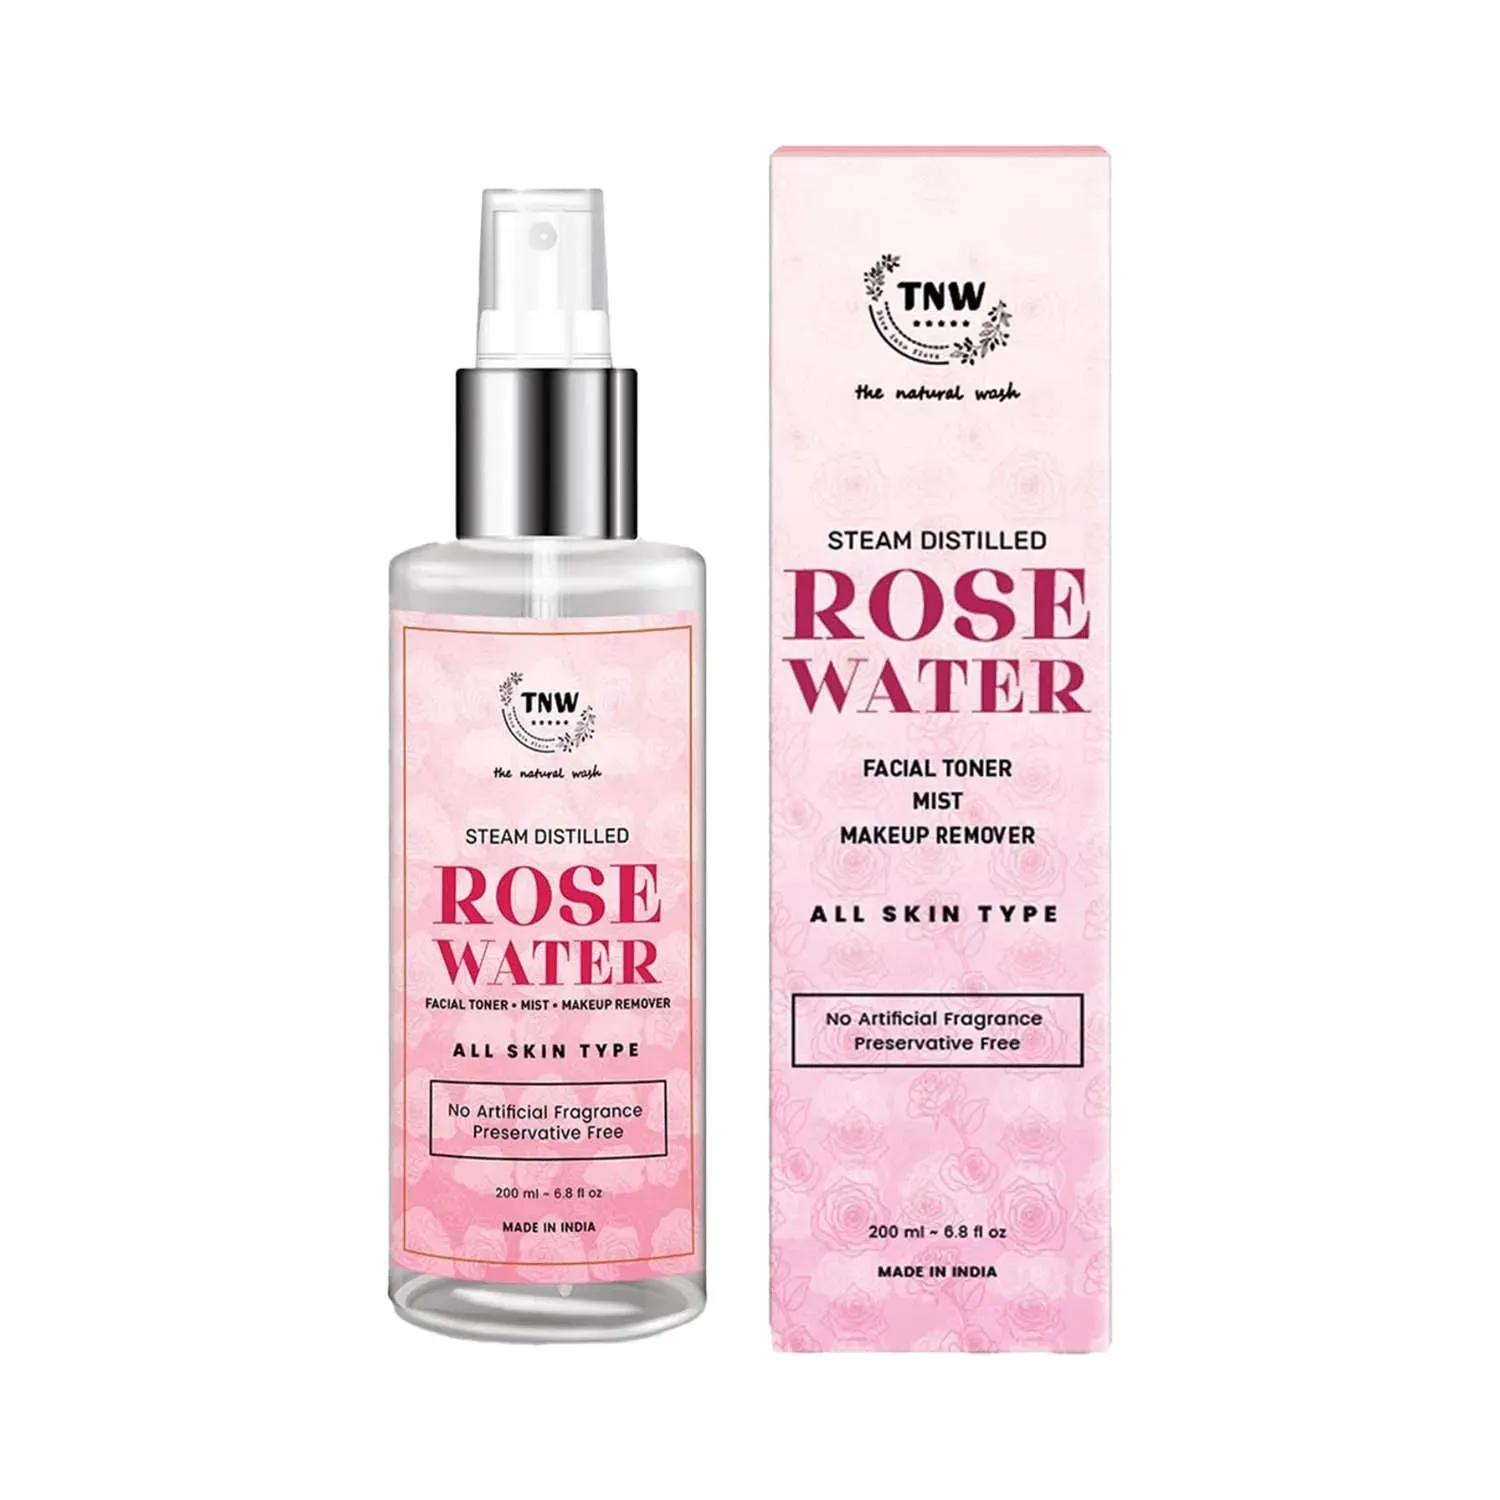 tnw the natural wash steam distilled rose water facial toner (200ml)